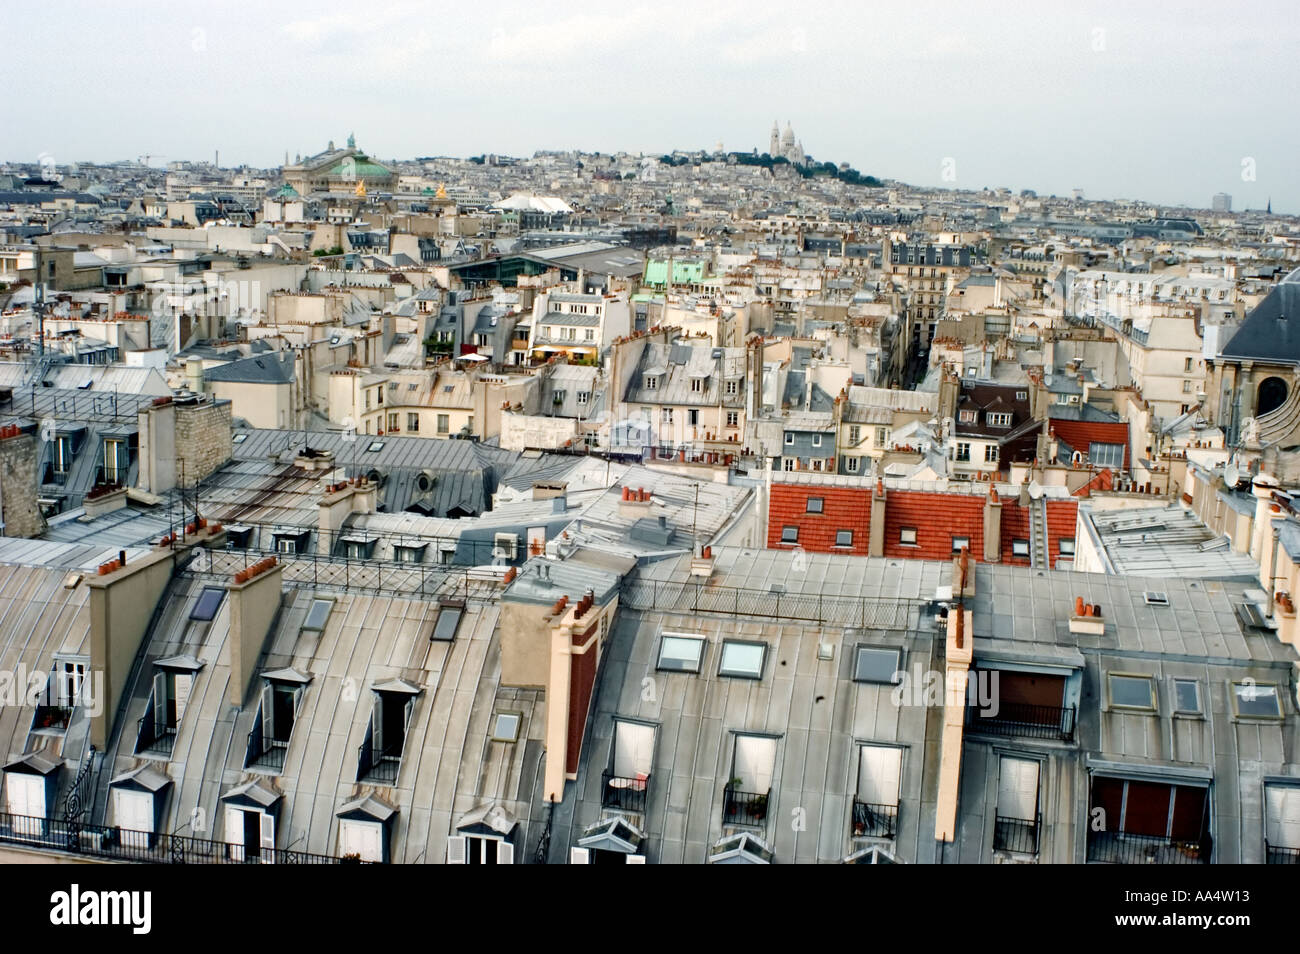 Buildings 'Paris France' Overview of Center of City,Looking North to Montmartre Hill, French Architecture, cityscape, paris rooftops Stock Photo